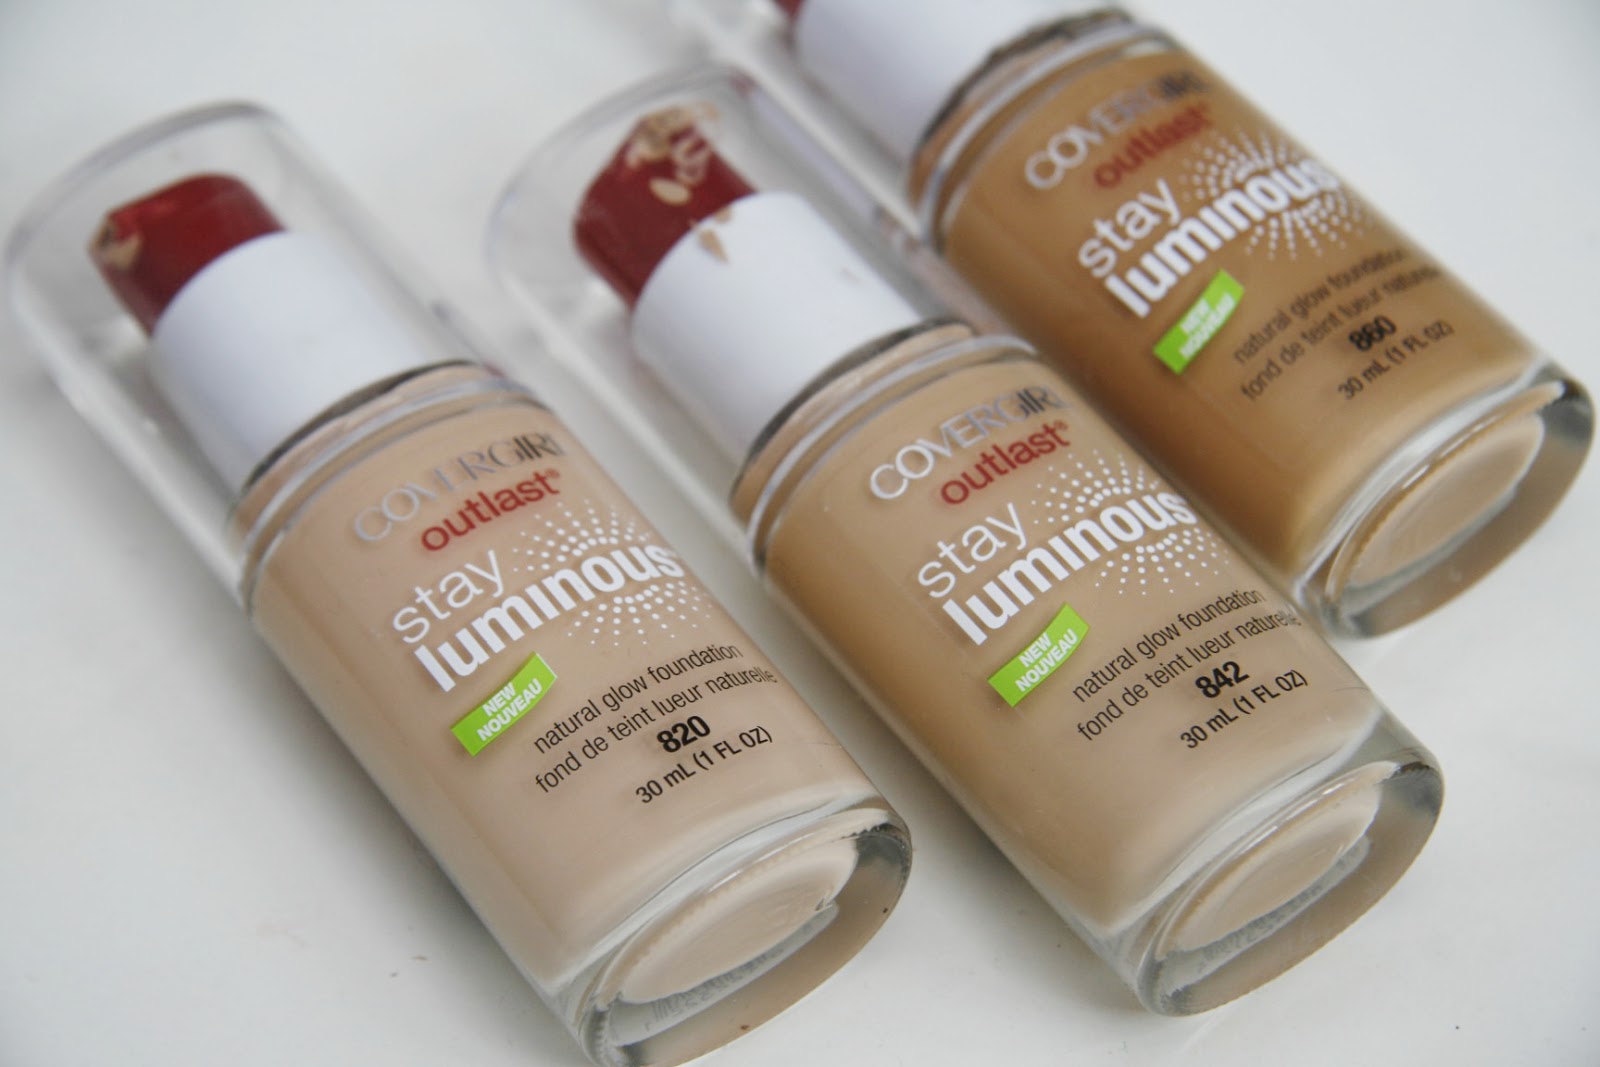 Is Covergirl a good foundation?